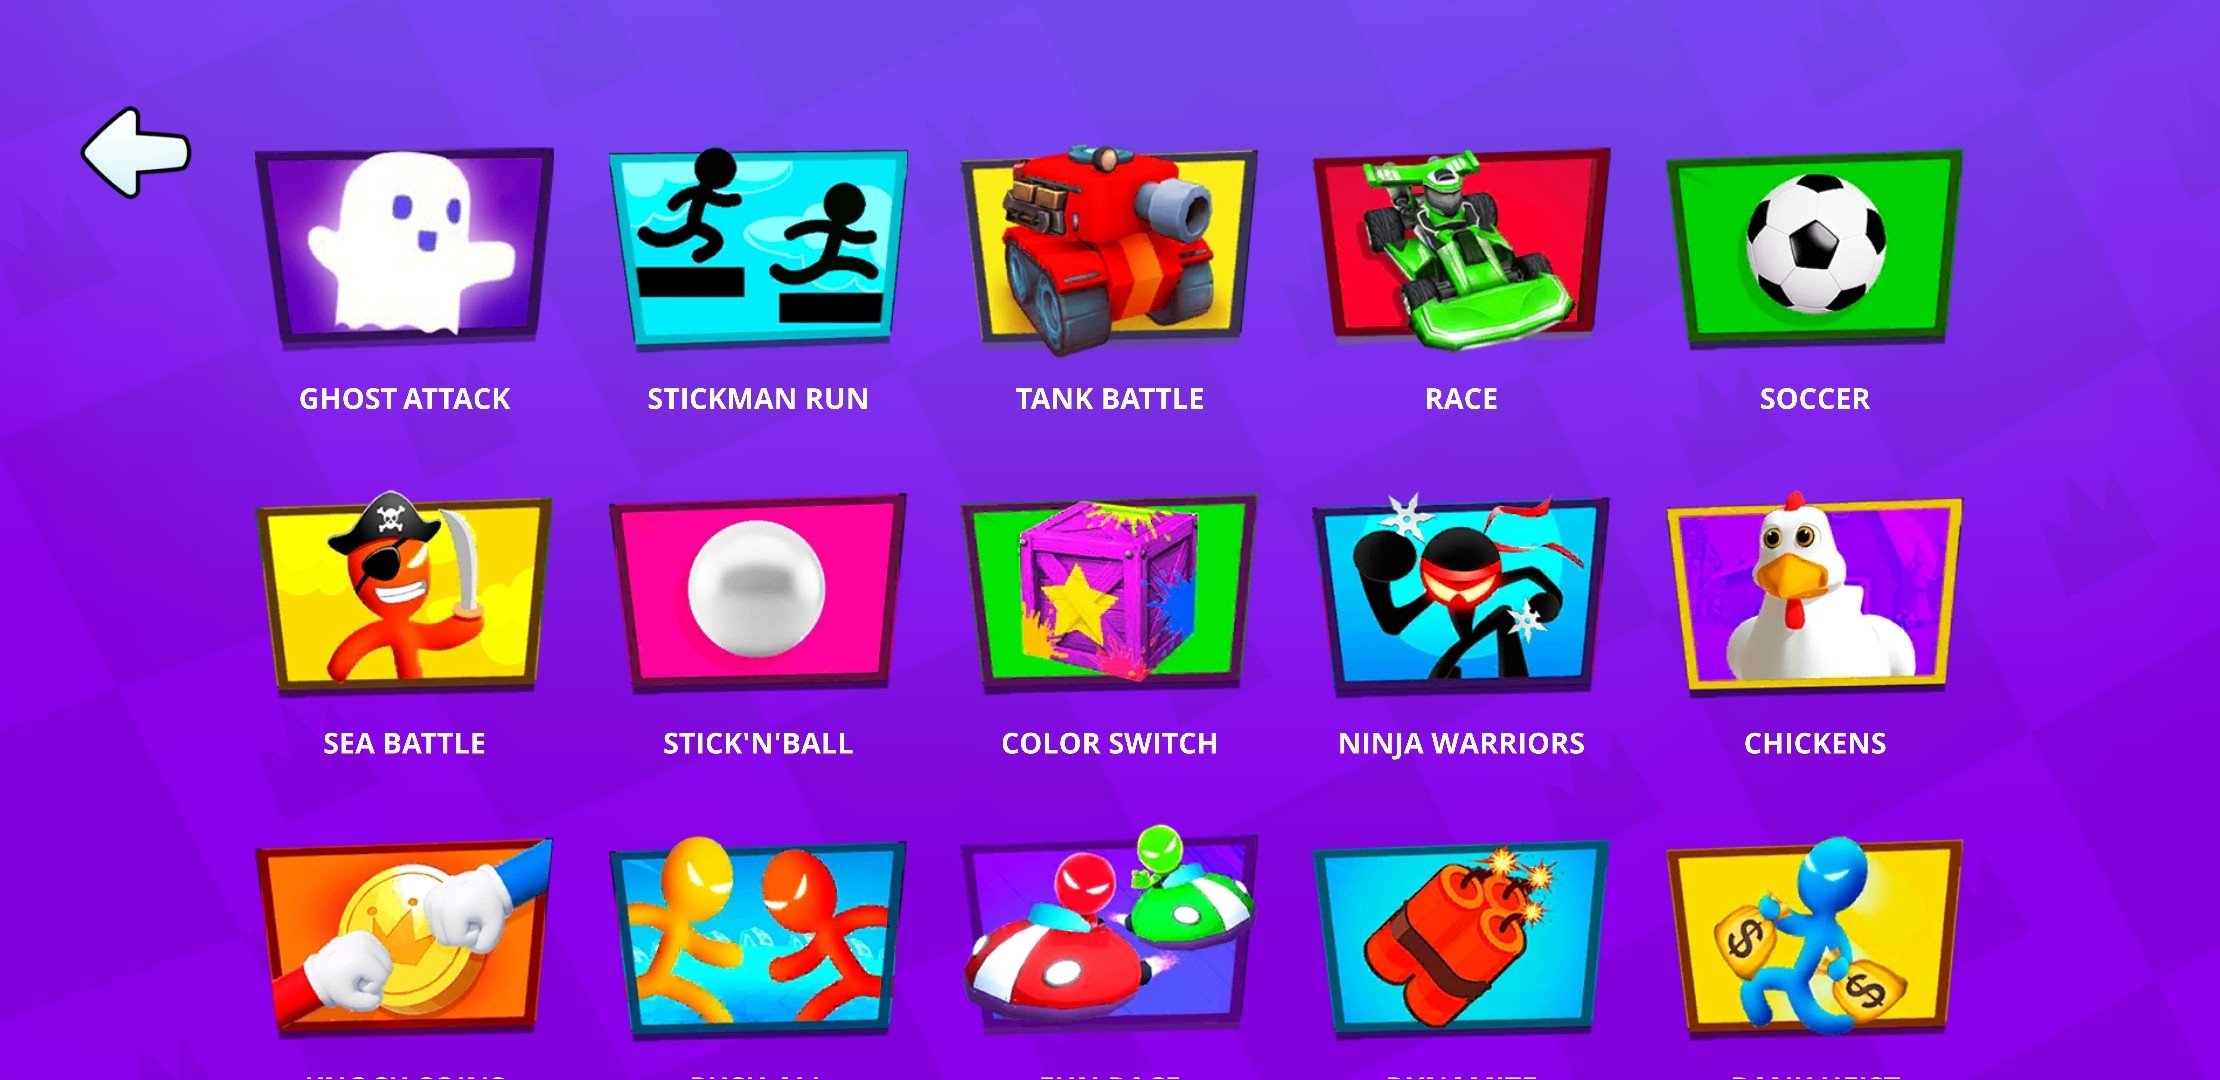 Stickman Party MOD APK Download for Android Free